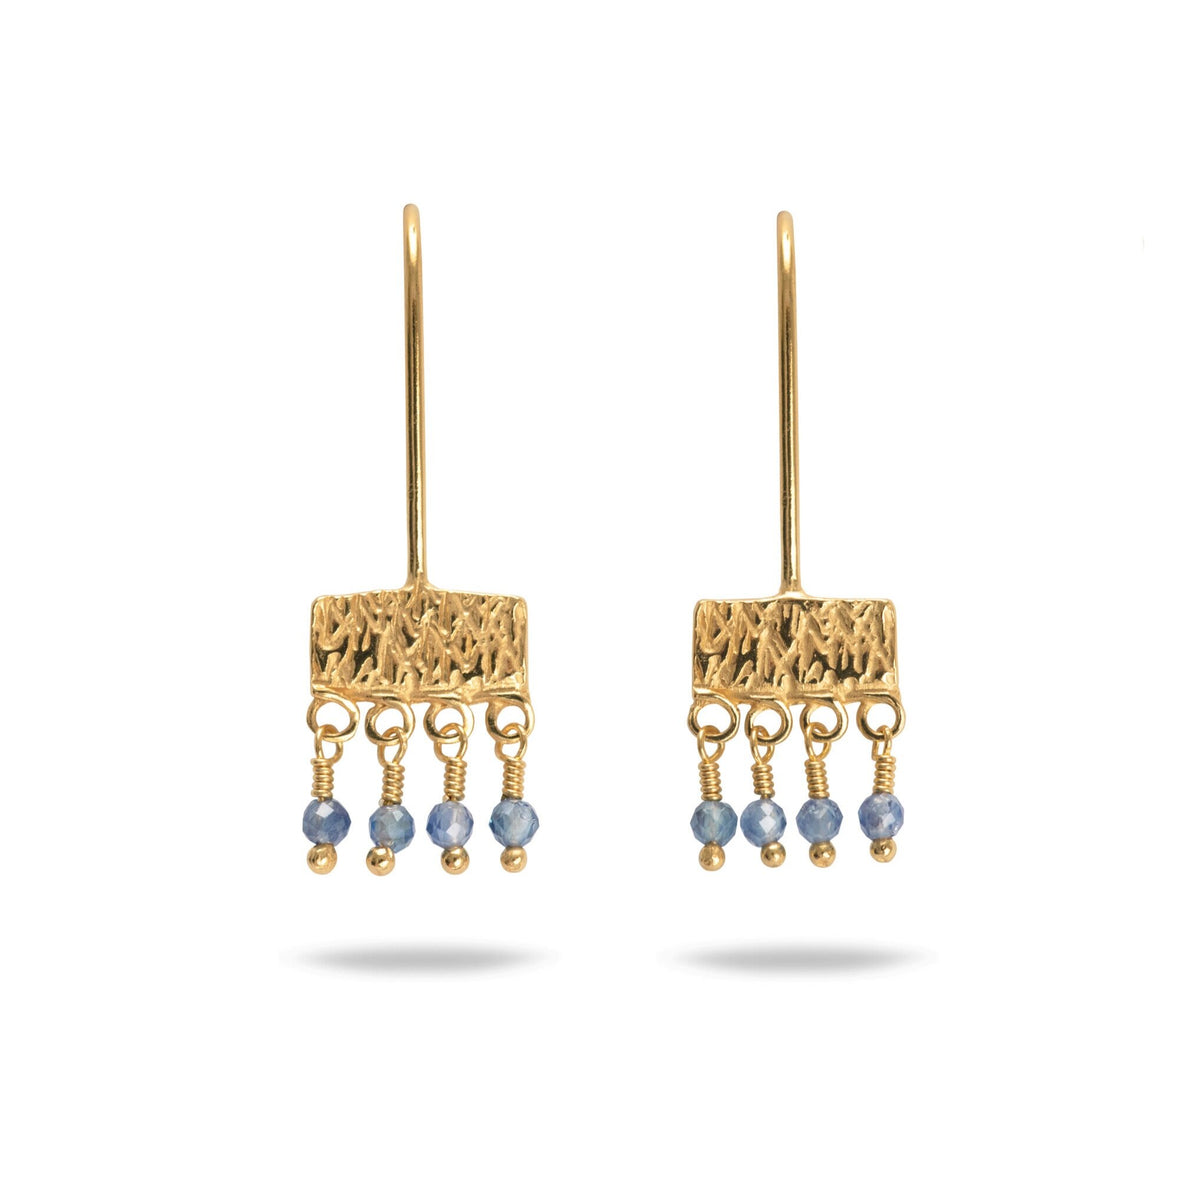 Mim Best Small stamped drop earrings, 14ct Gold vermeil, Sapphire